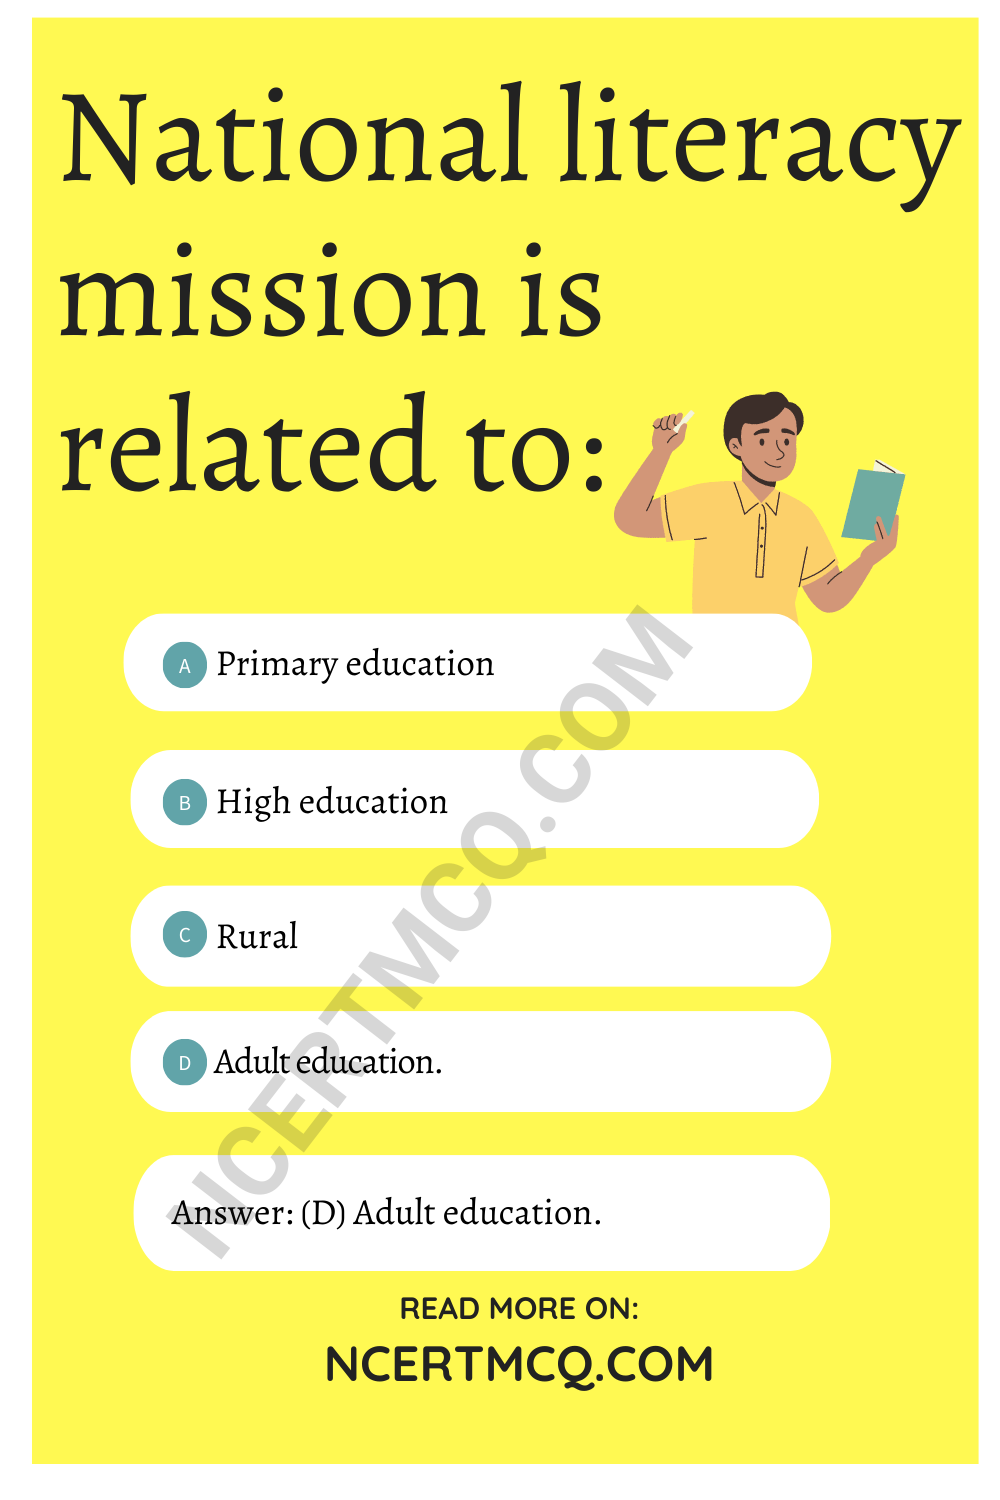 National literacy mission is related to: